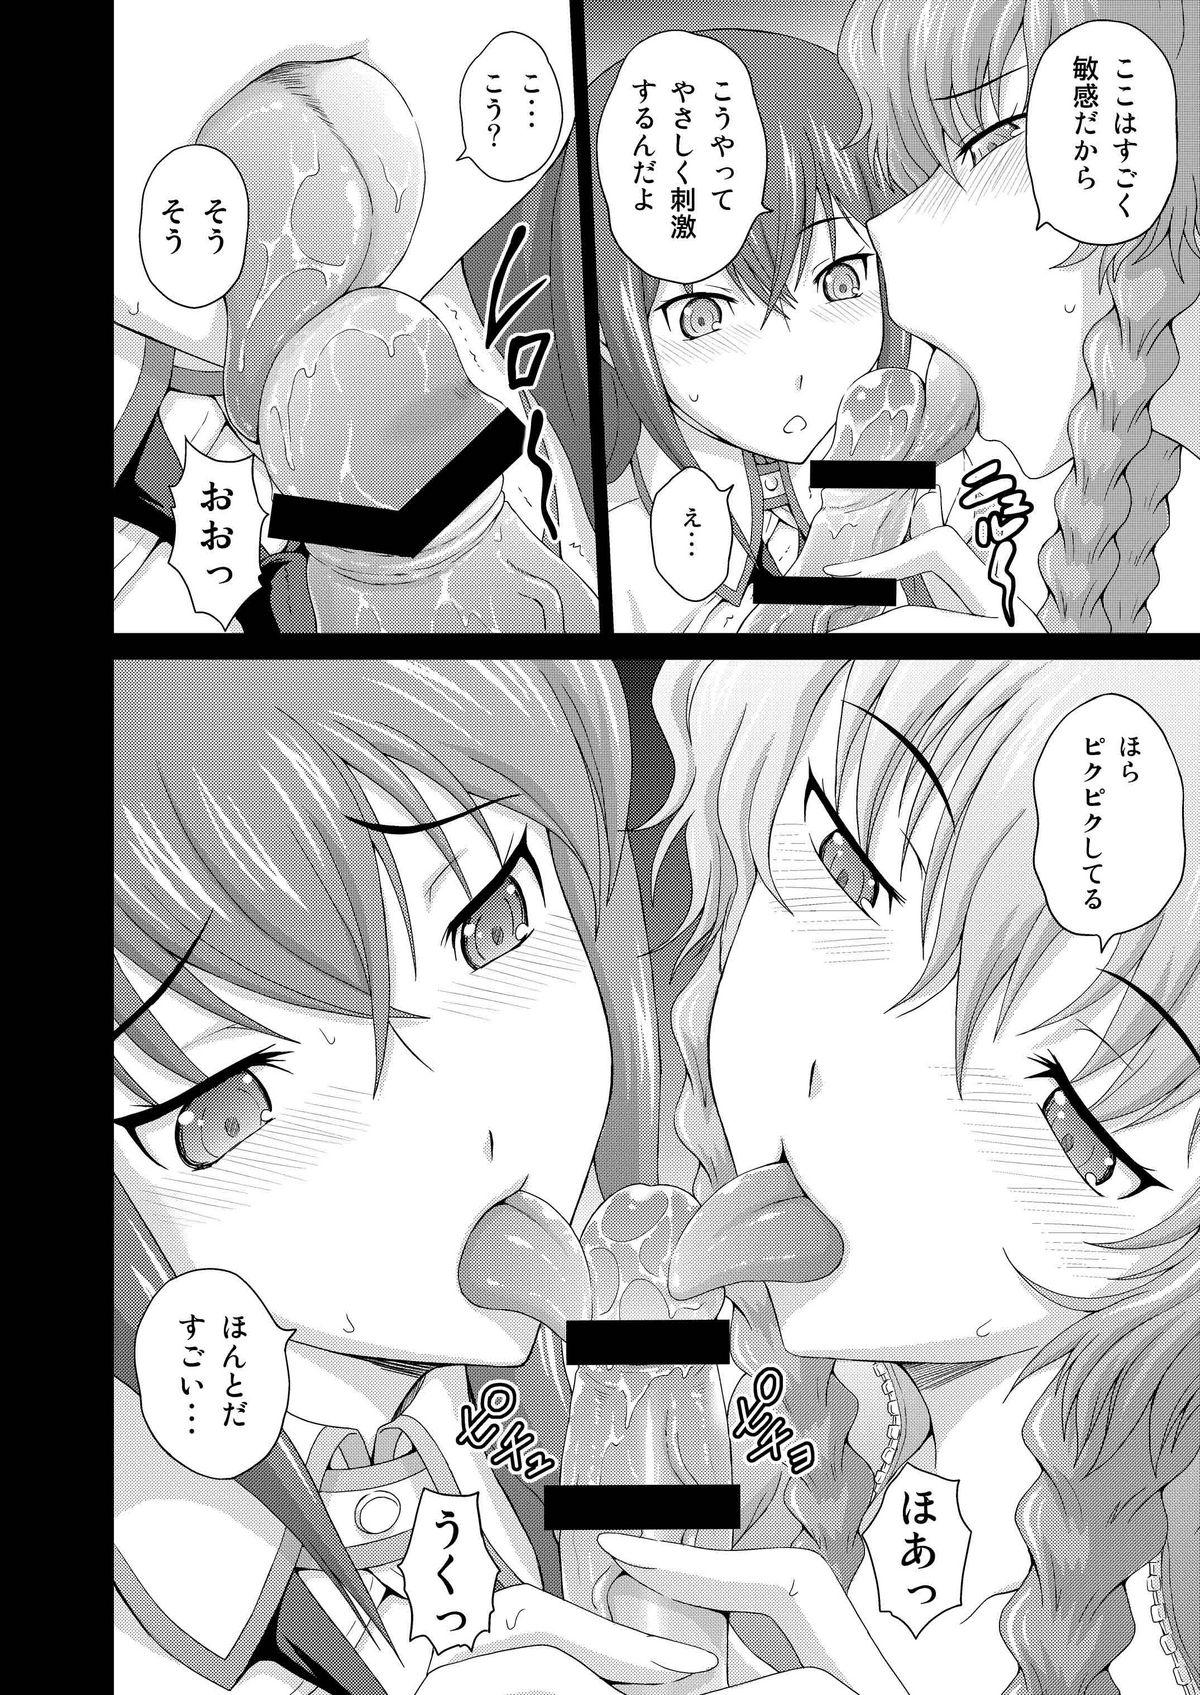 Riding Cock Heavens;Gate - Steinsgate Home - Page 6